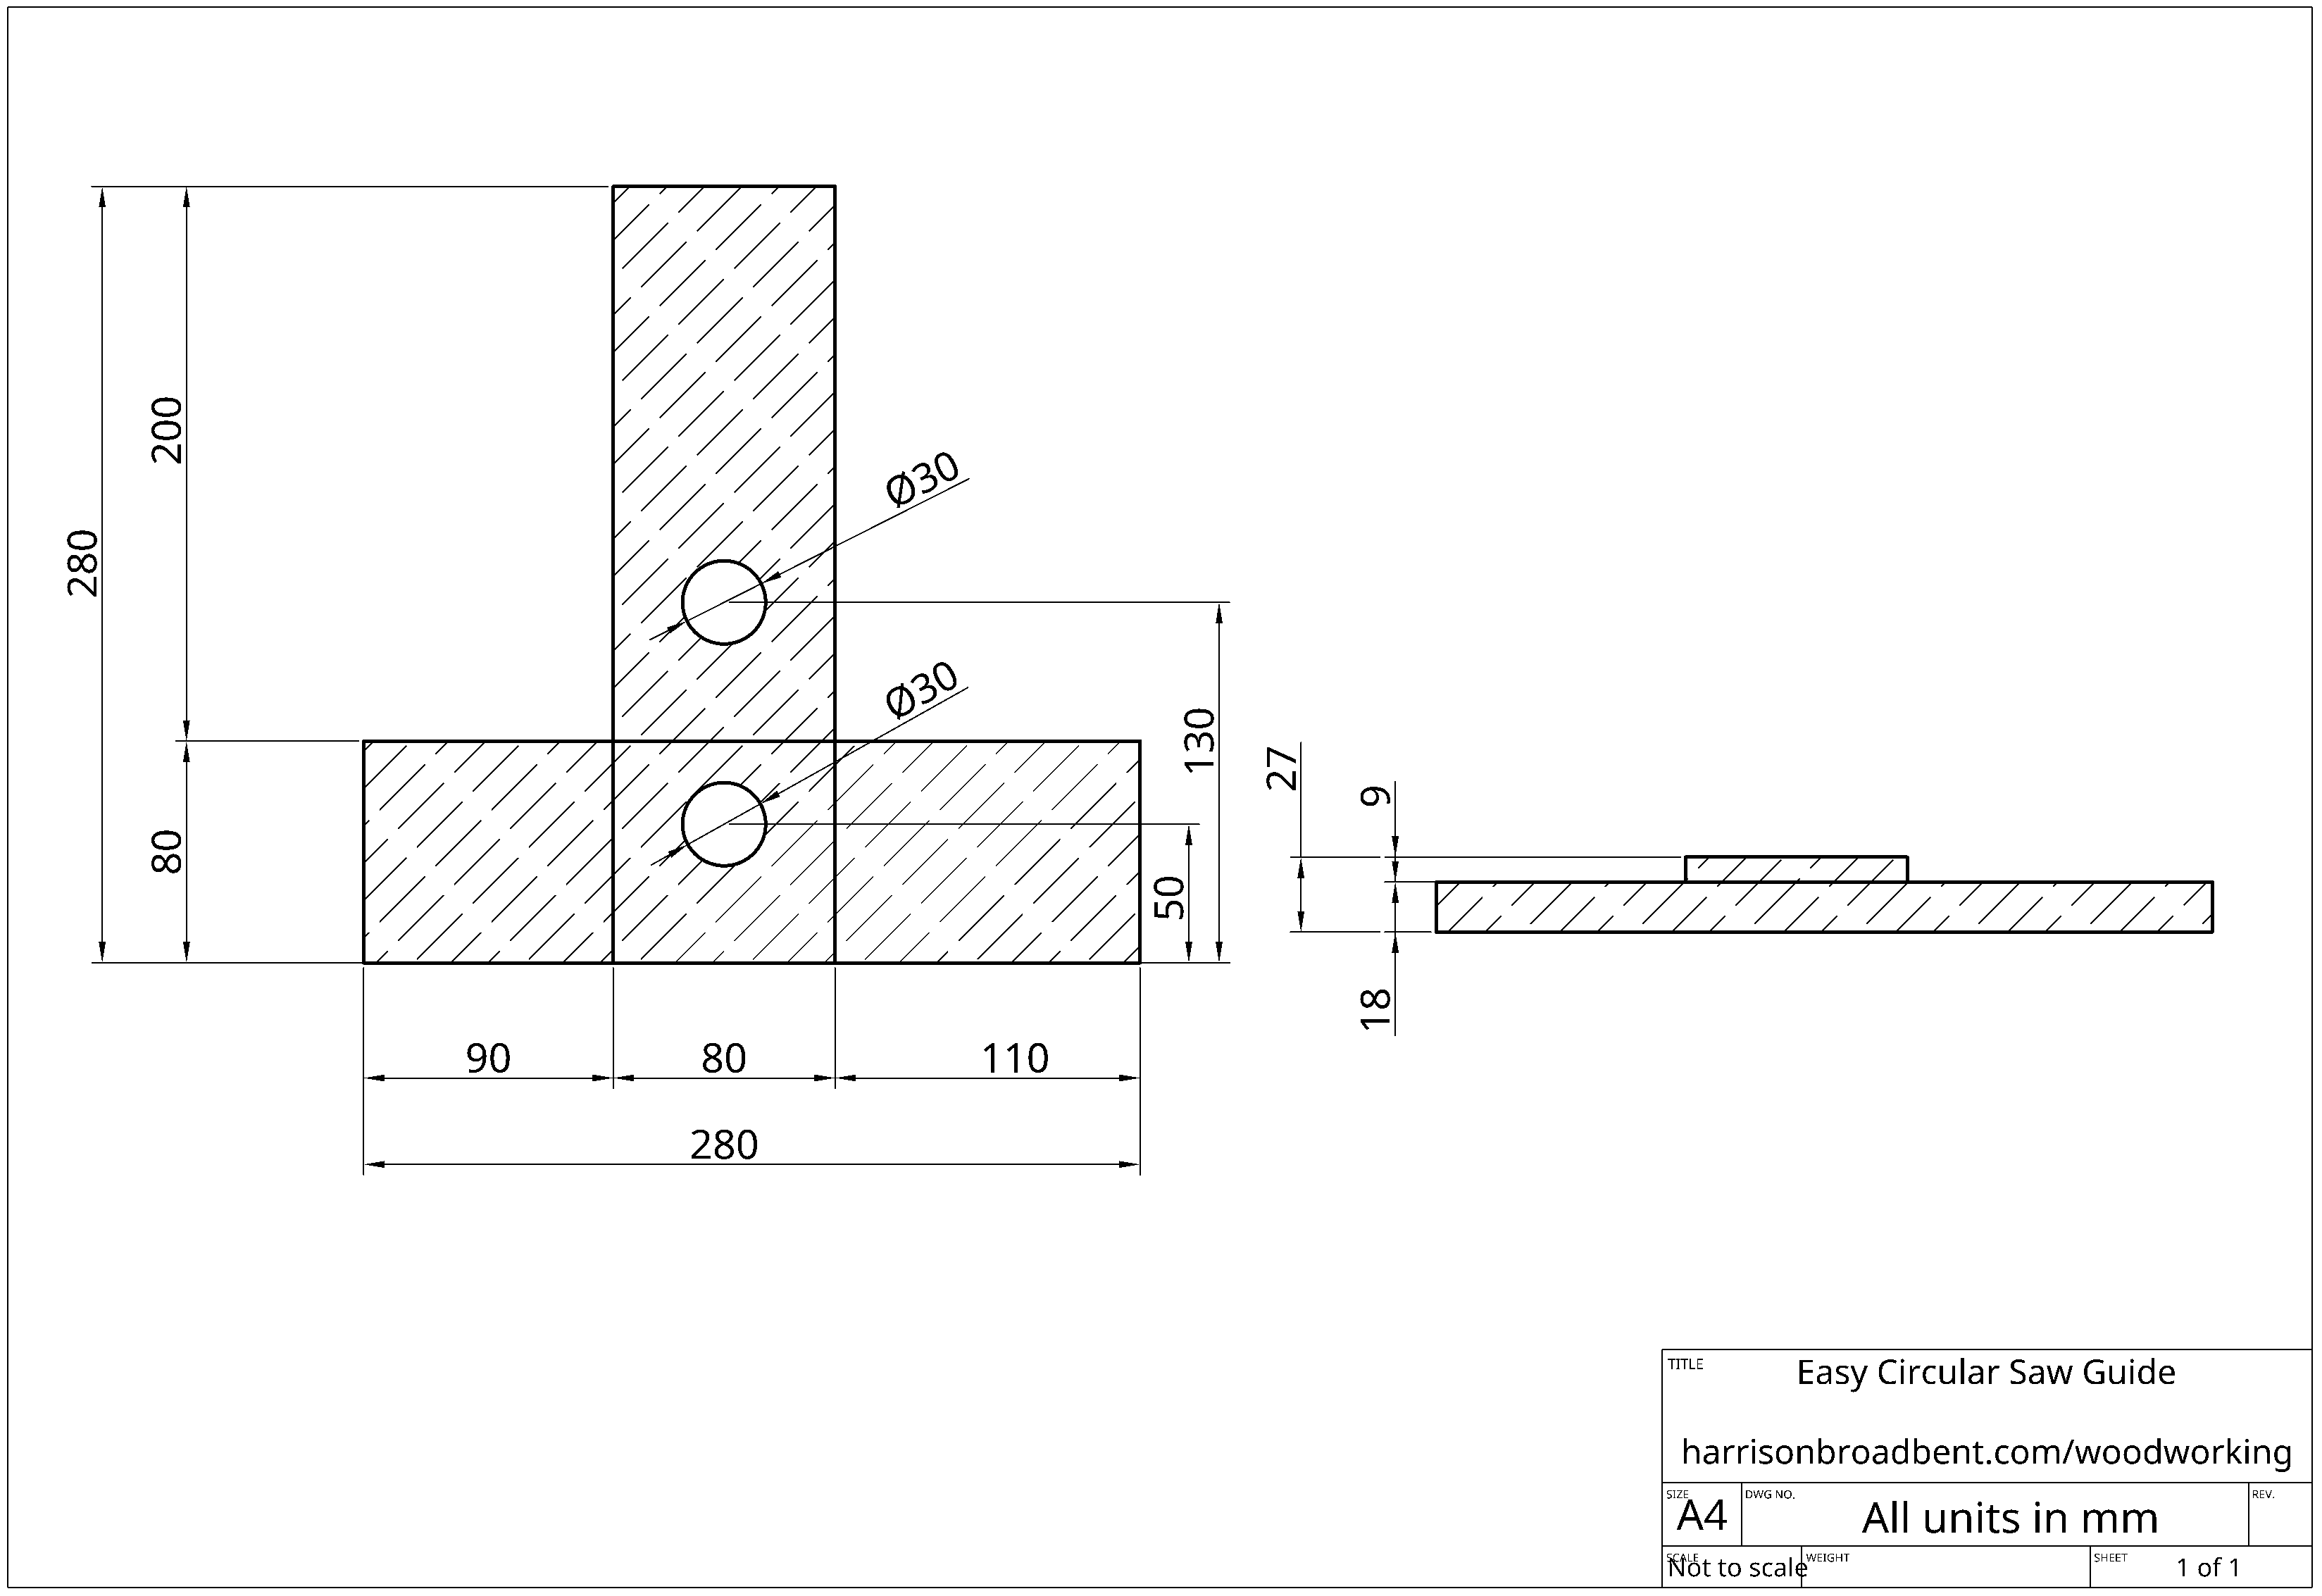 Technical drawing of a simple circular saw guide